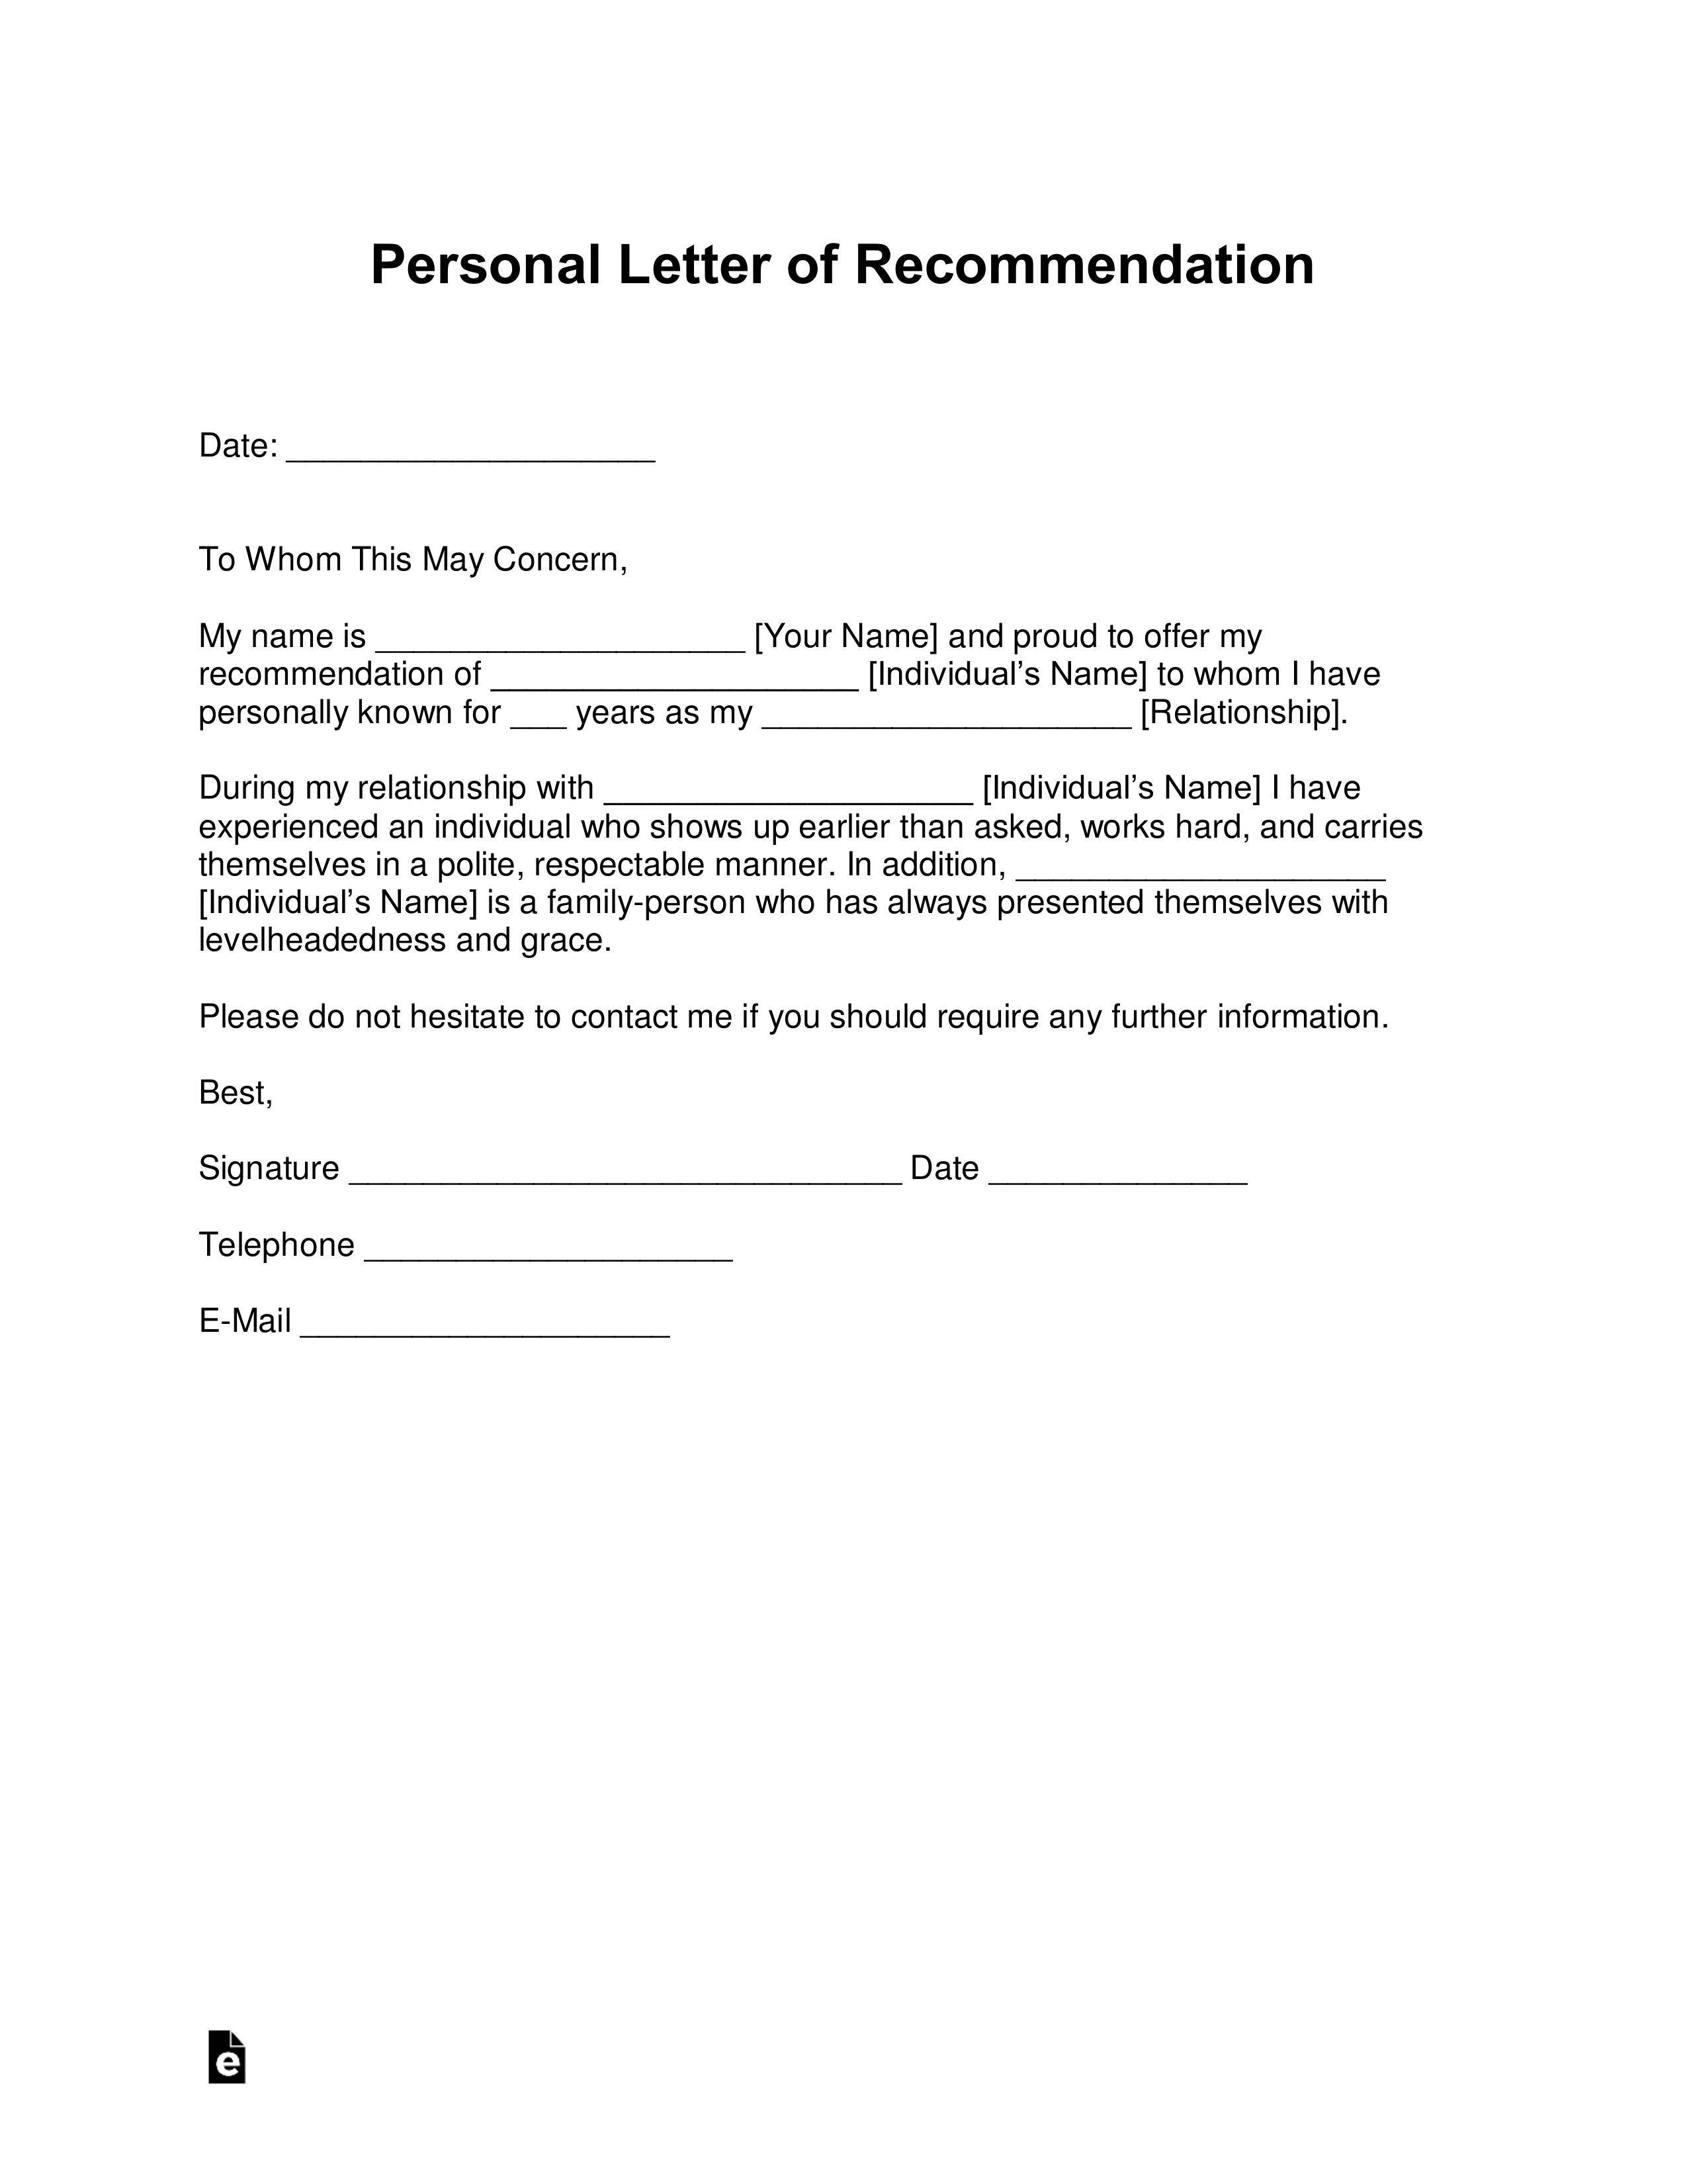 Letter Of Recommendation Sample Pdf from eforms.com